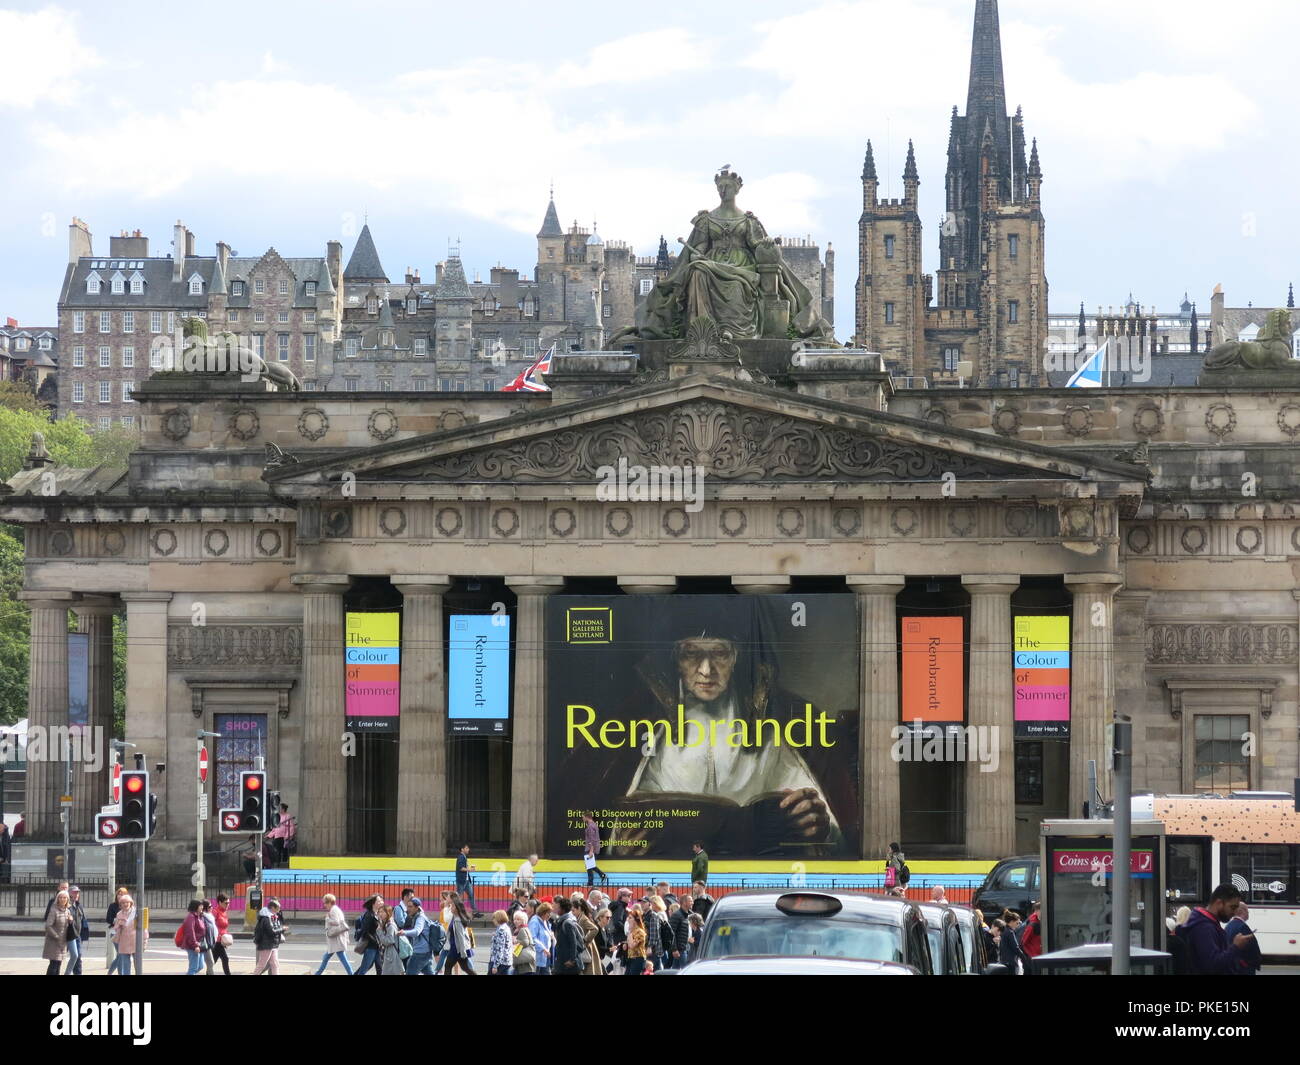 A view looking down Hanover Street towards the Royal Scottish Academy building with its advertising poster for the Rembrandt exhibition; Edinburgh. Stock Photo